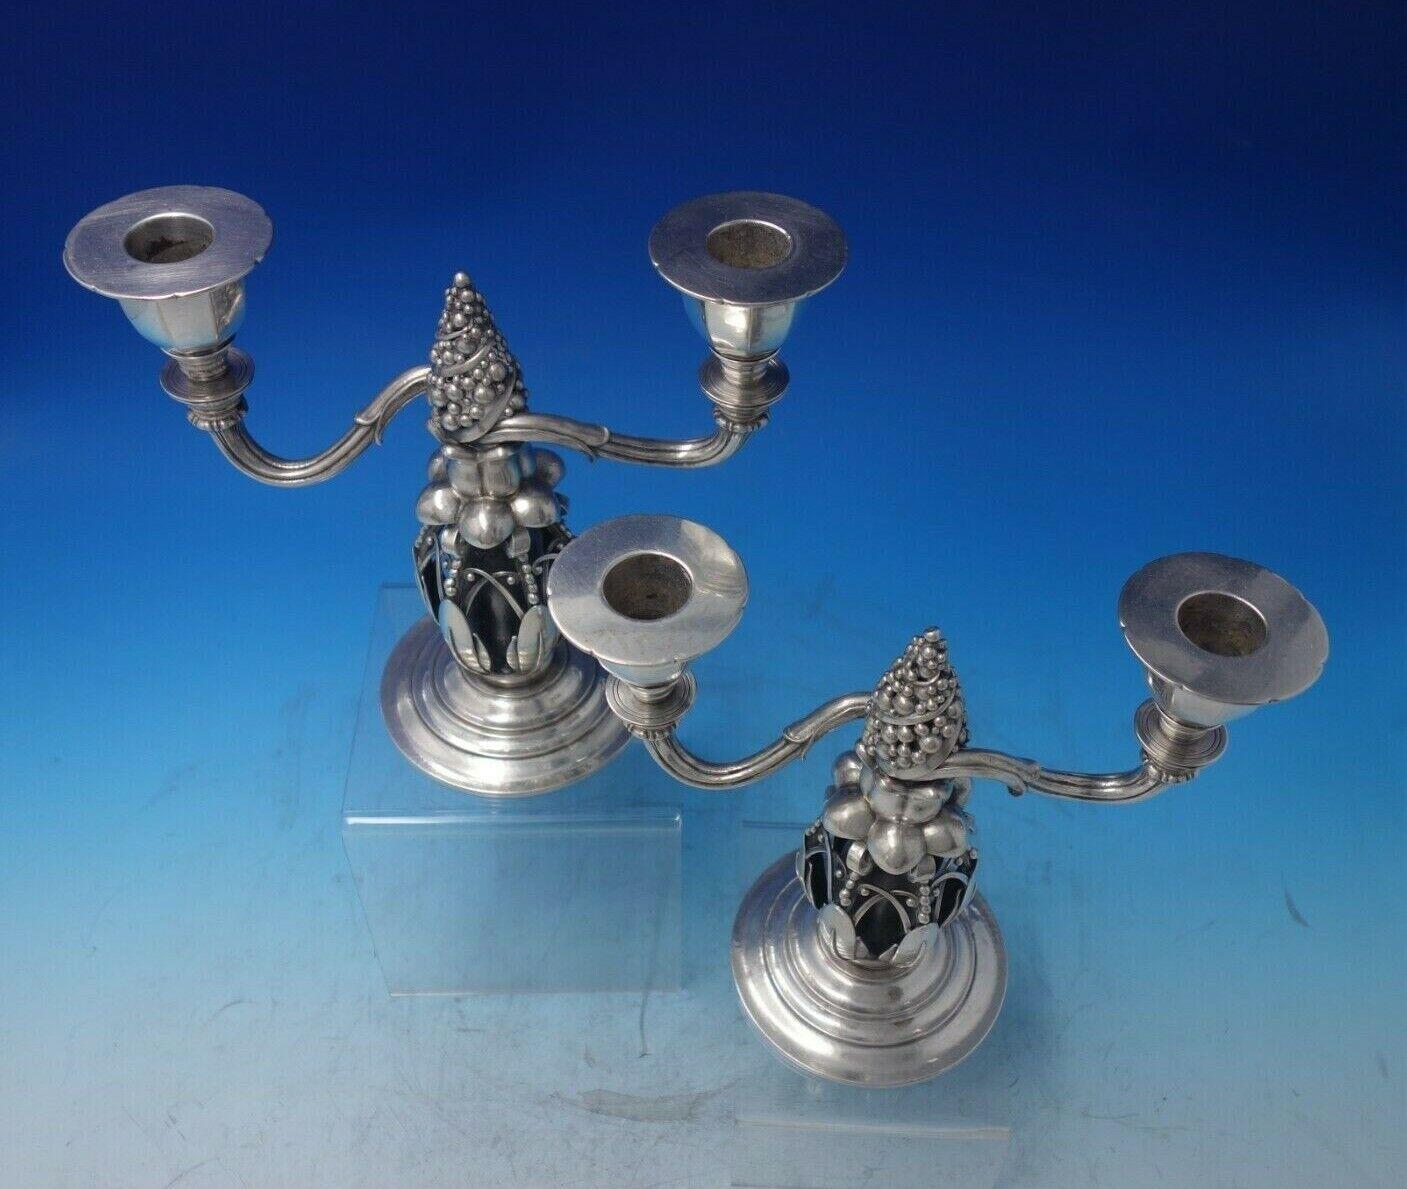 Georg Jensen

Exceedingly rare Georg Jensen two-light candelabra pair featuring figural beaded fir cones, marked #244. The pieces measure 9